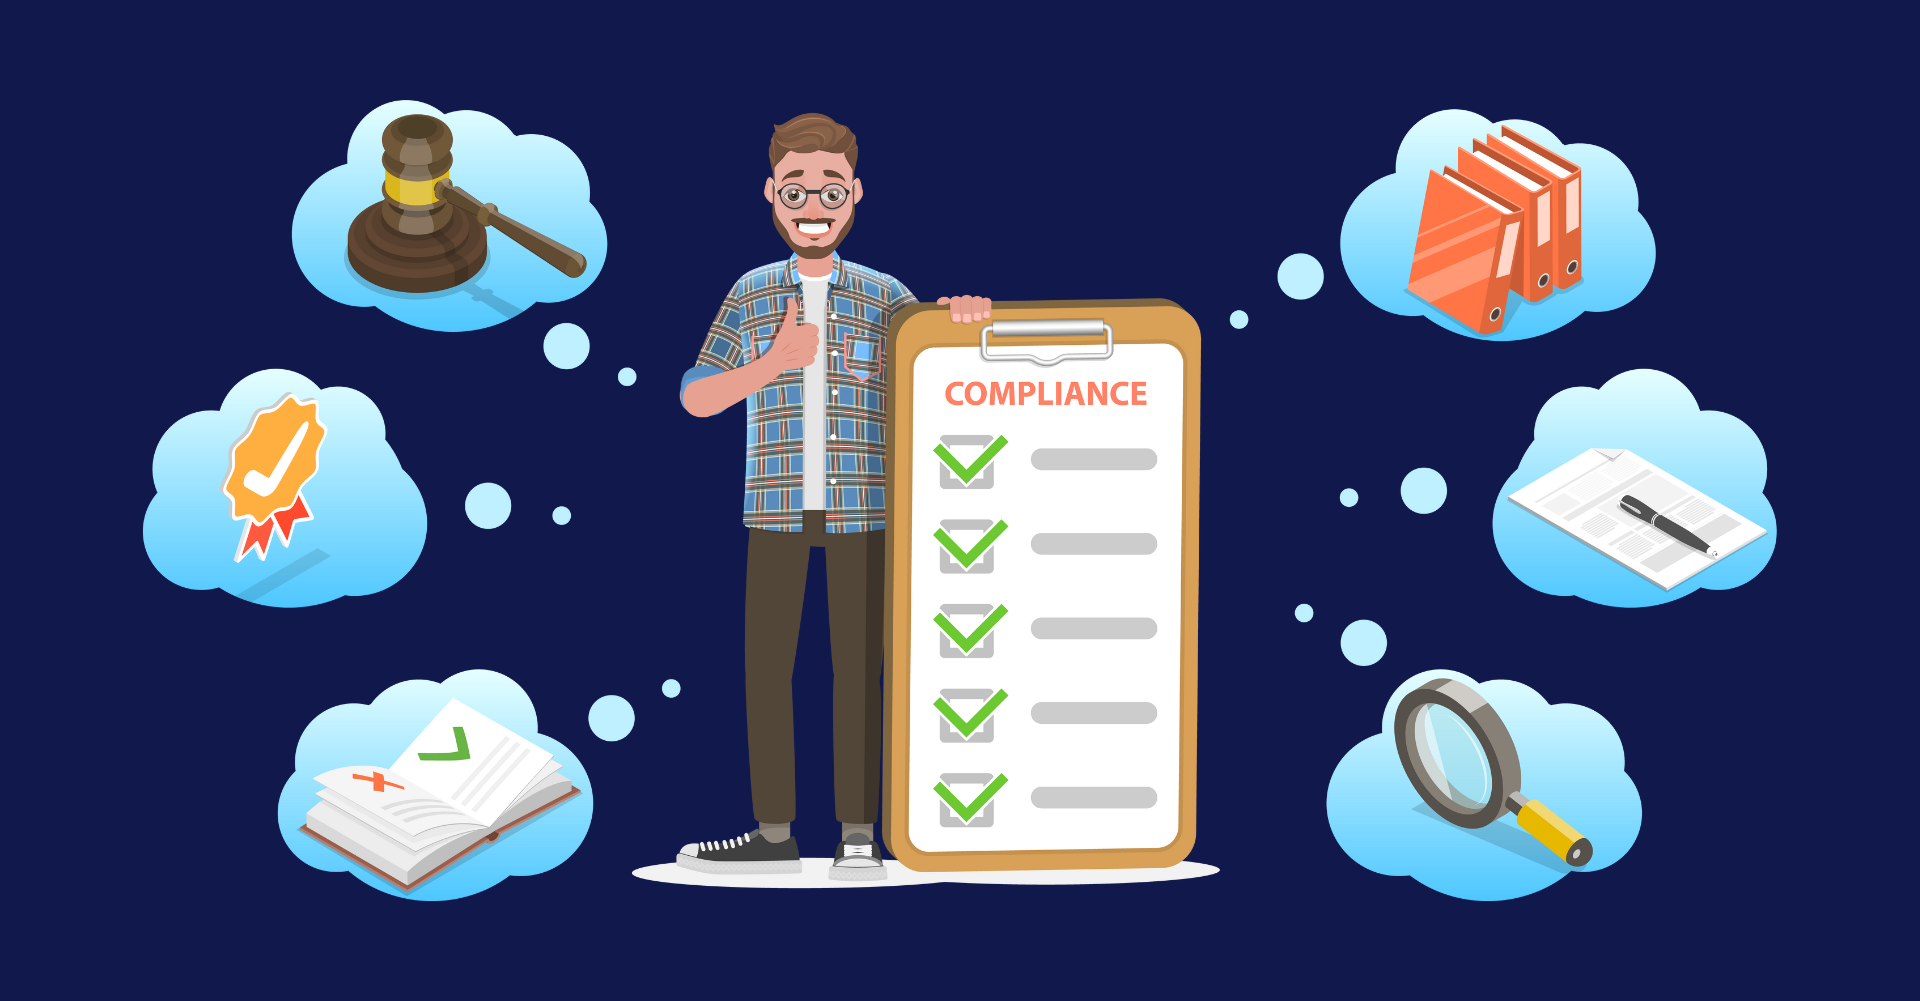 Compliance Challenges